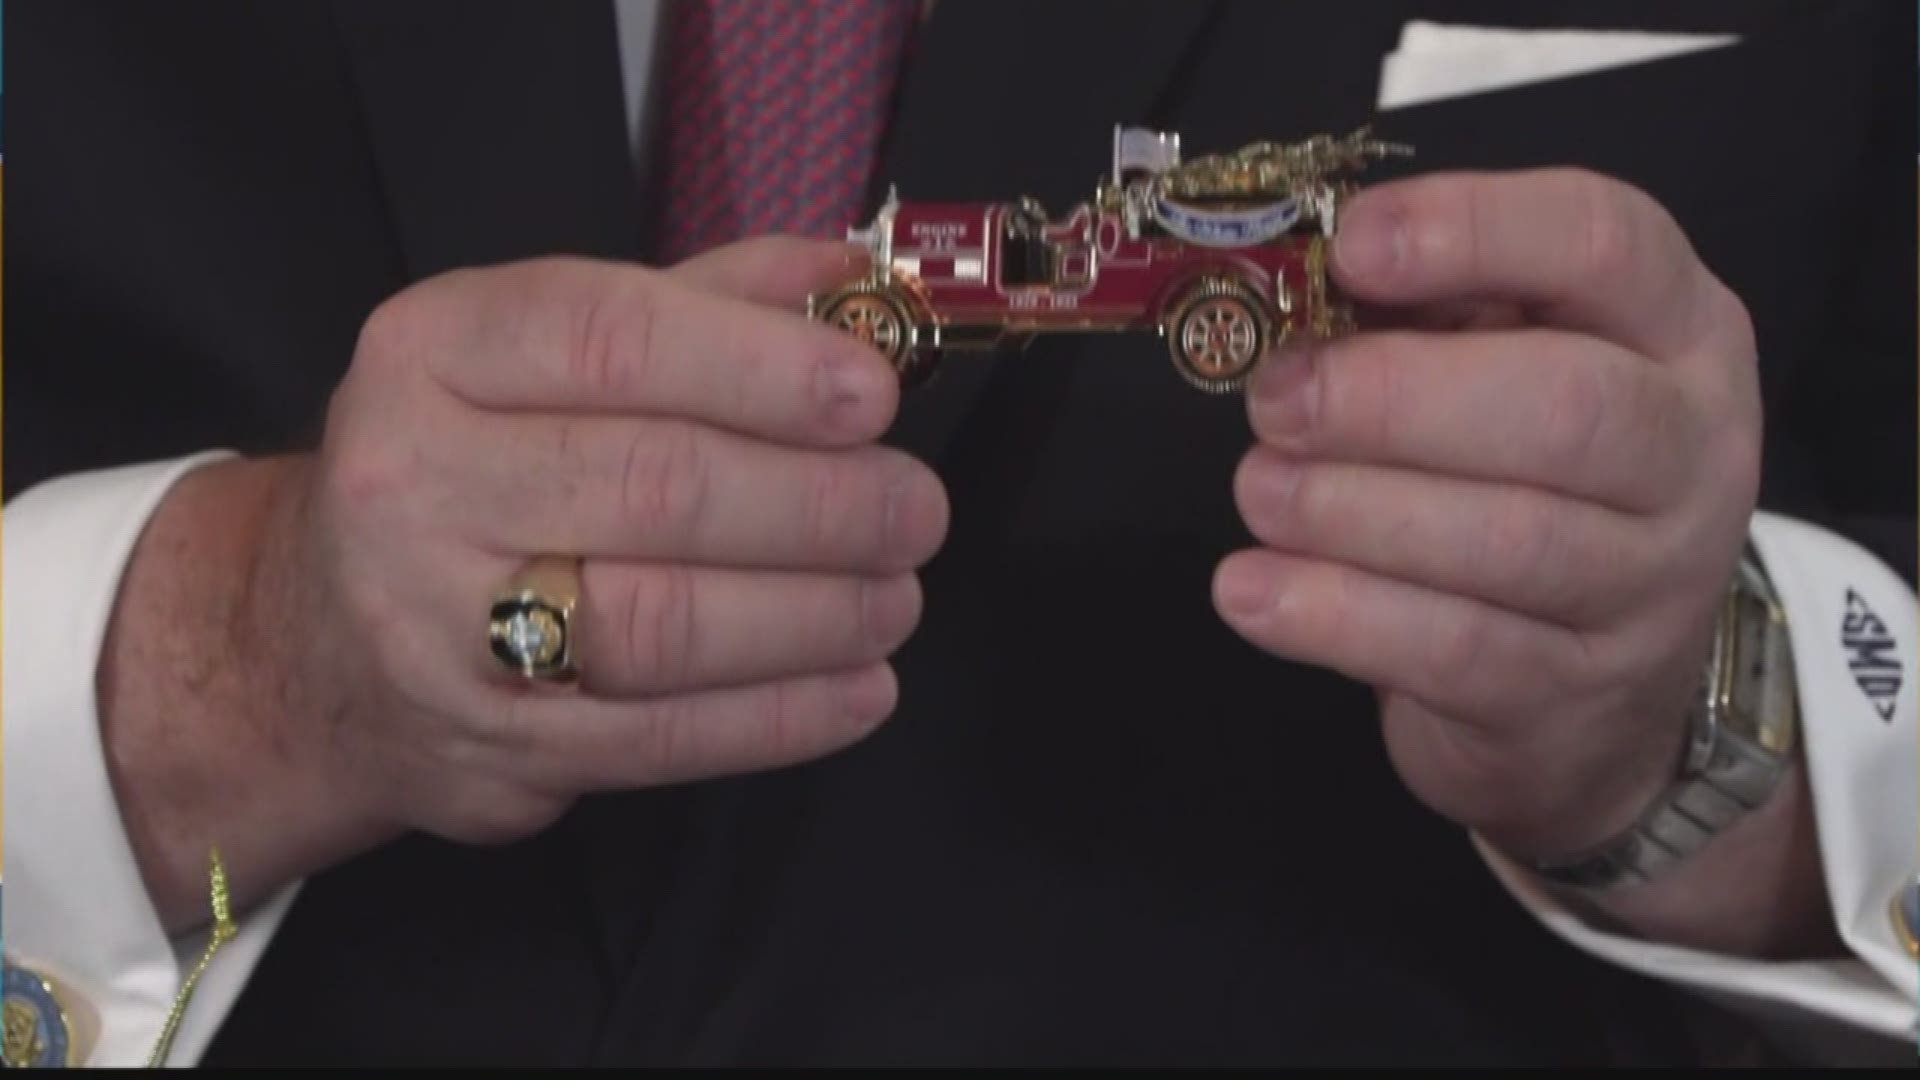 Get a look at this year's White House Christmas Ornament!